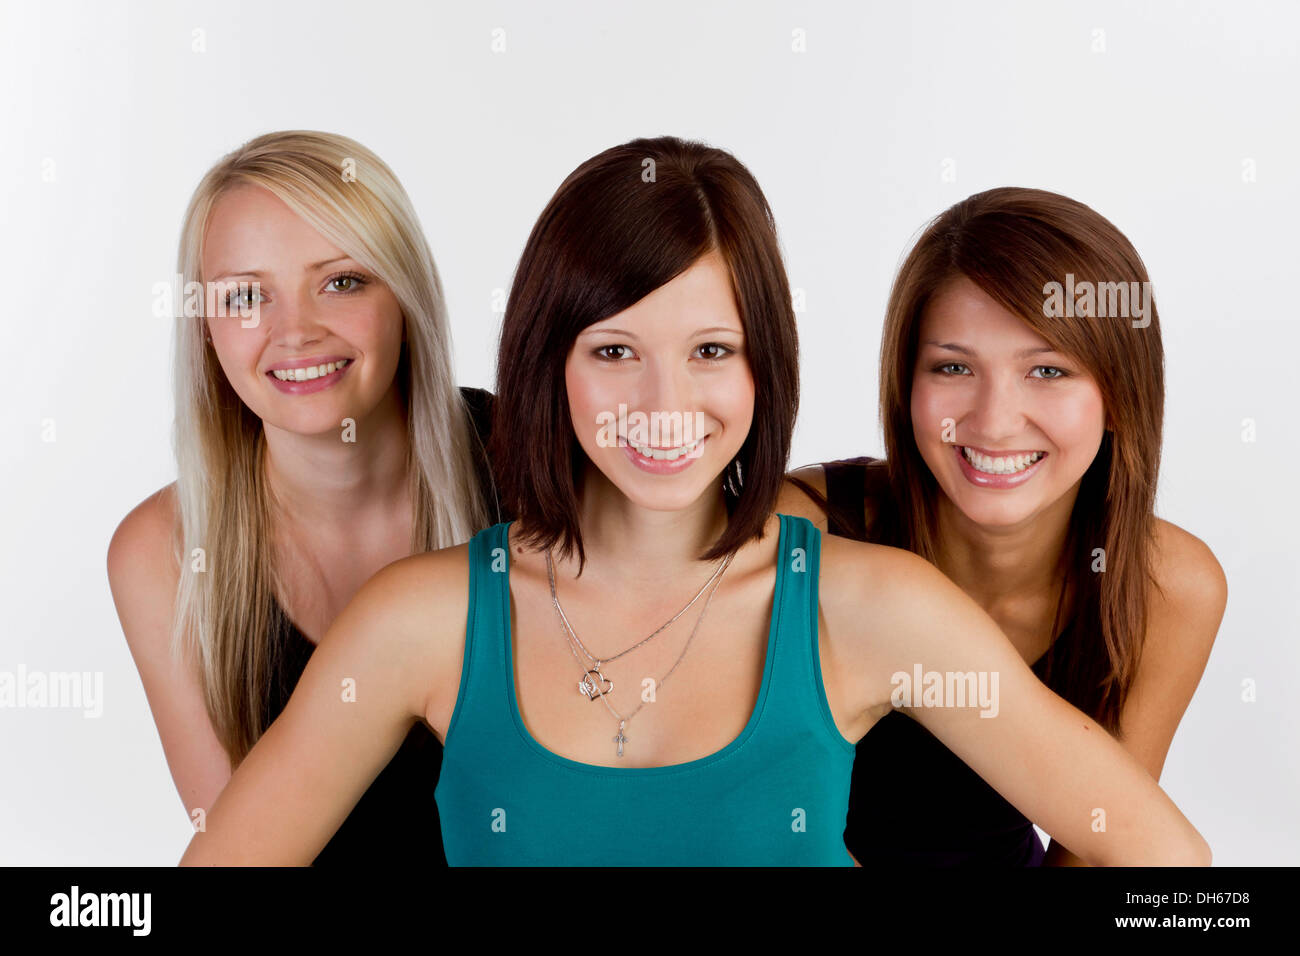 Three smiling young women Stock Photo